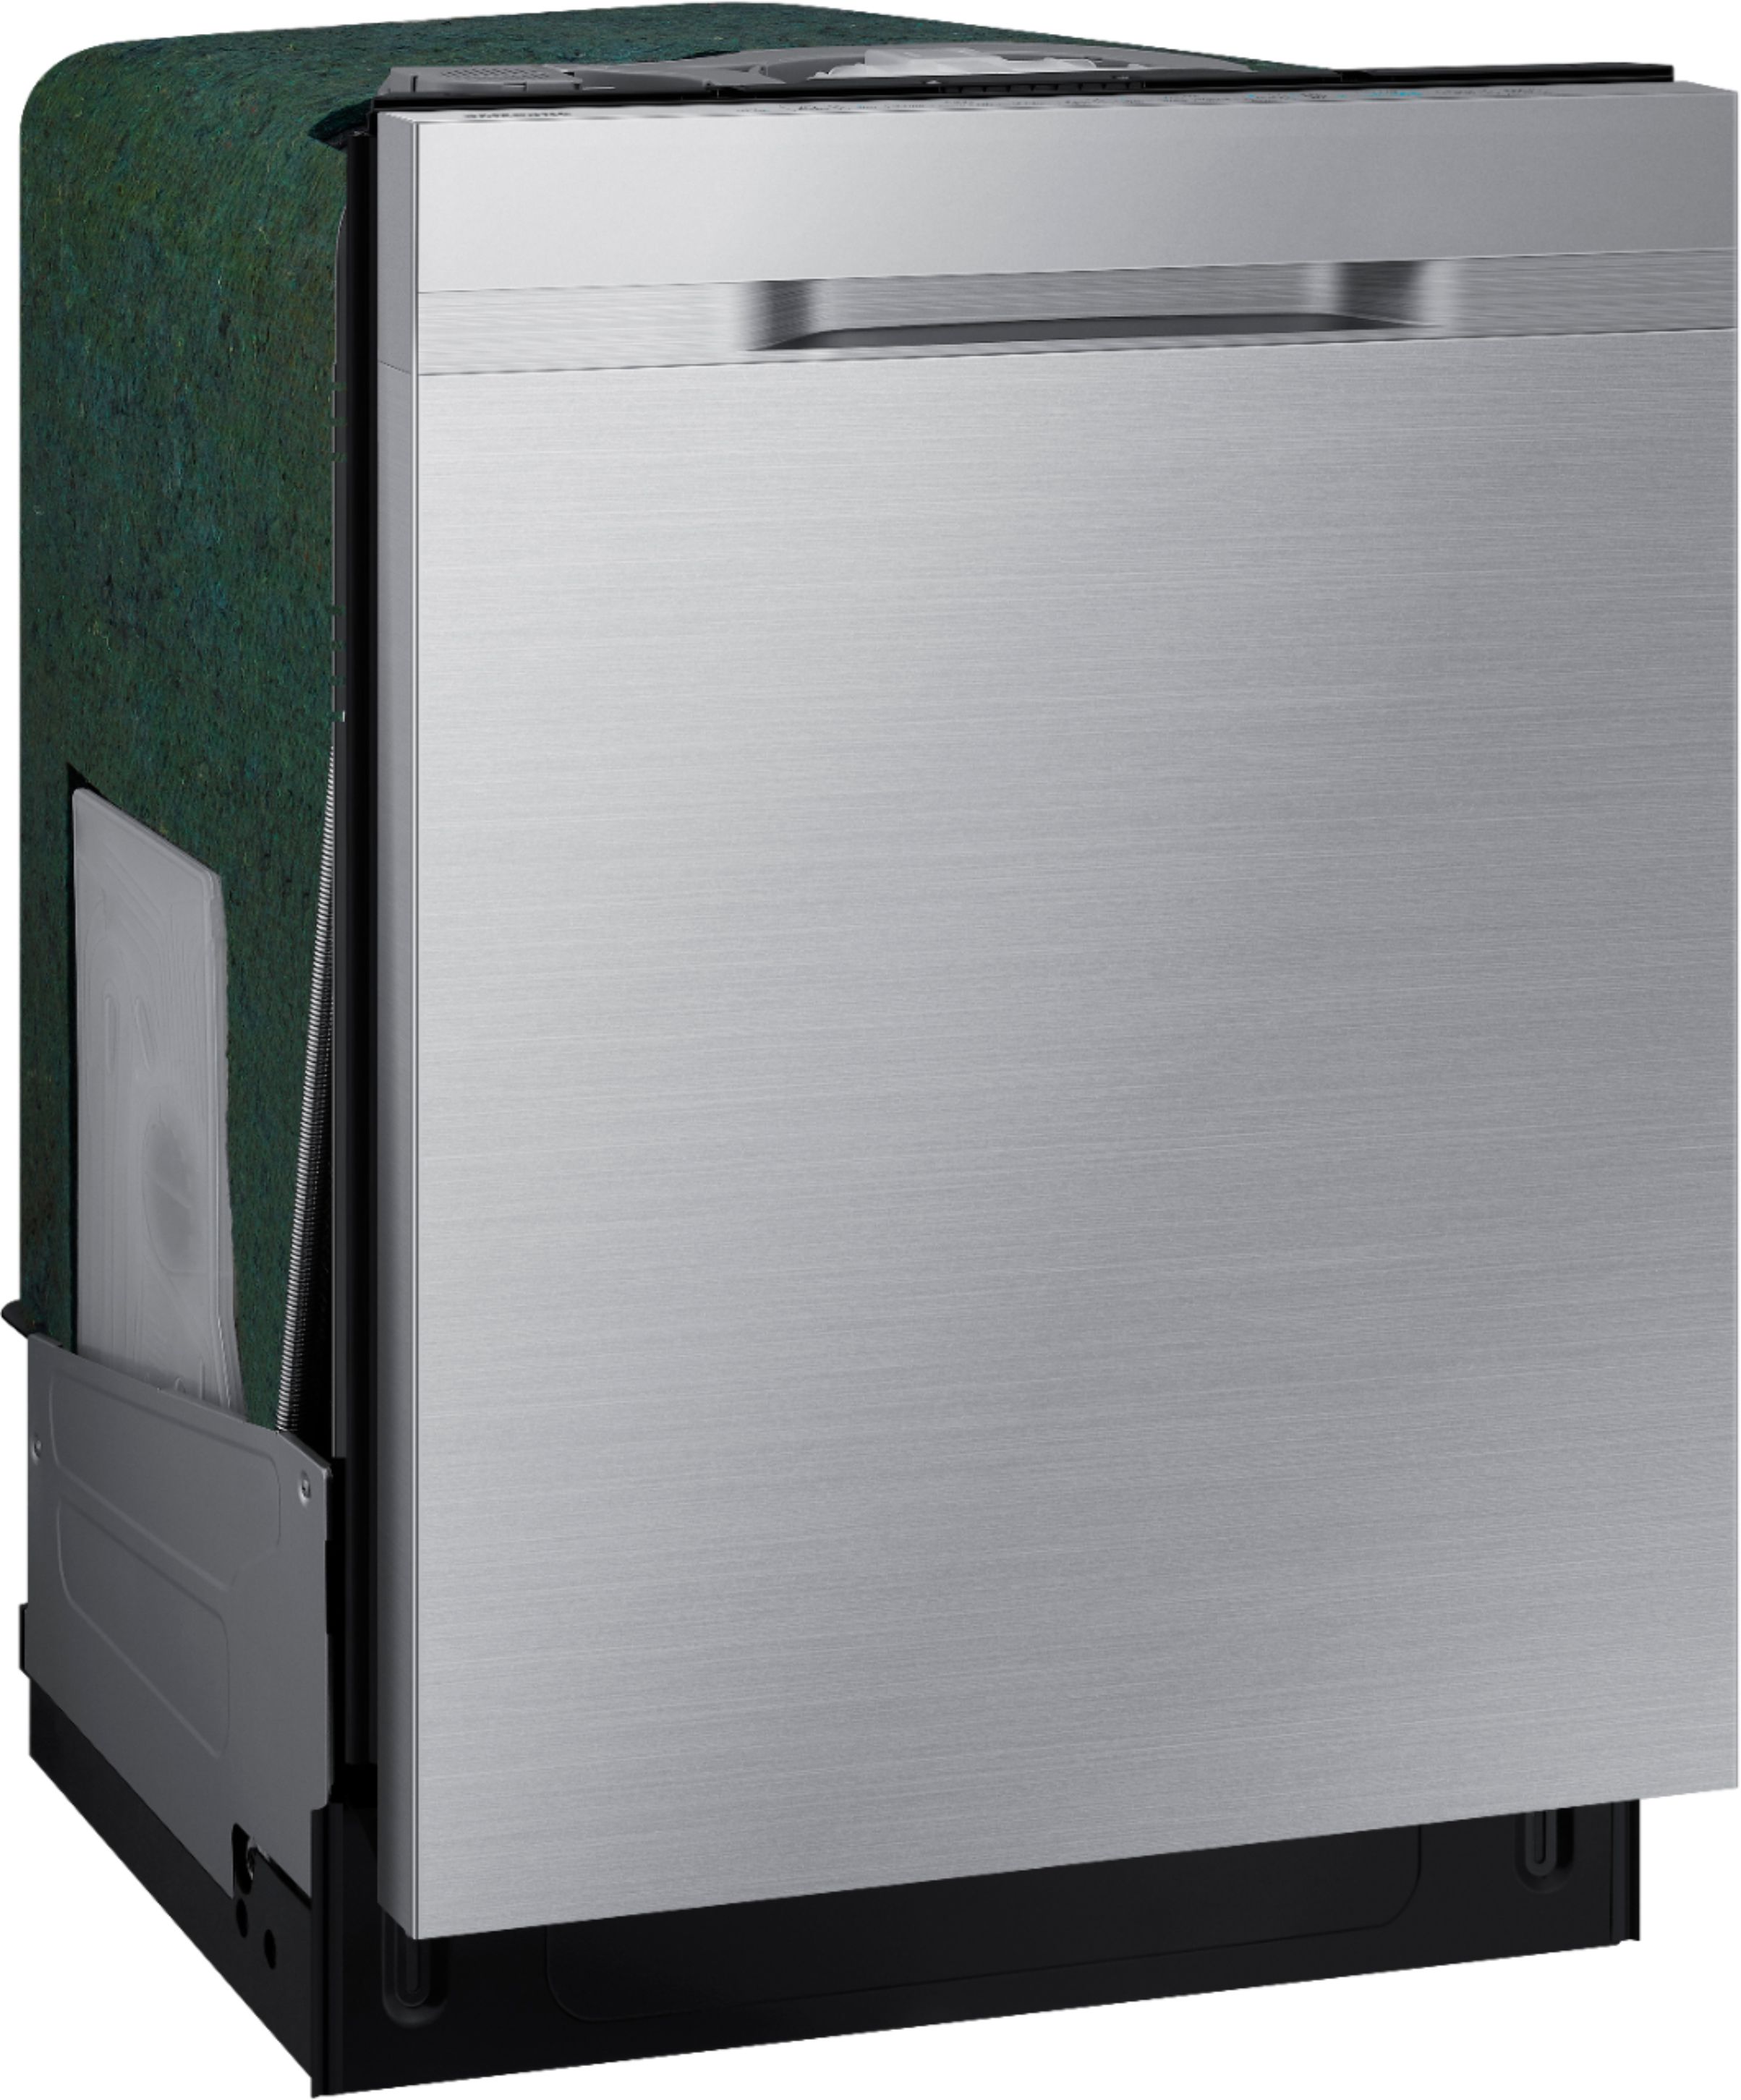 Angle View: GE Profile - Top Control Built-In Dishwasher with Stainless Steel Tub, 42dBA - Black stainless steel